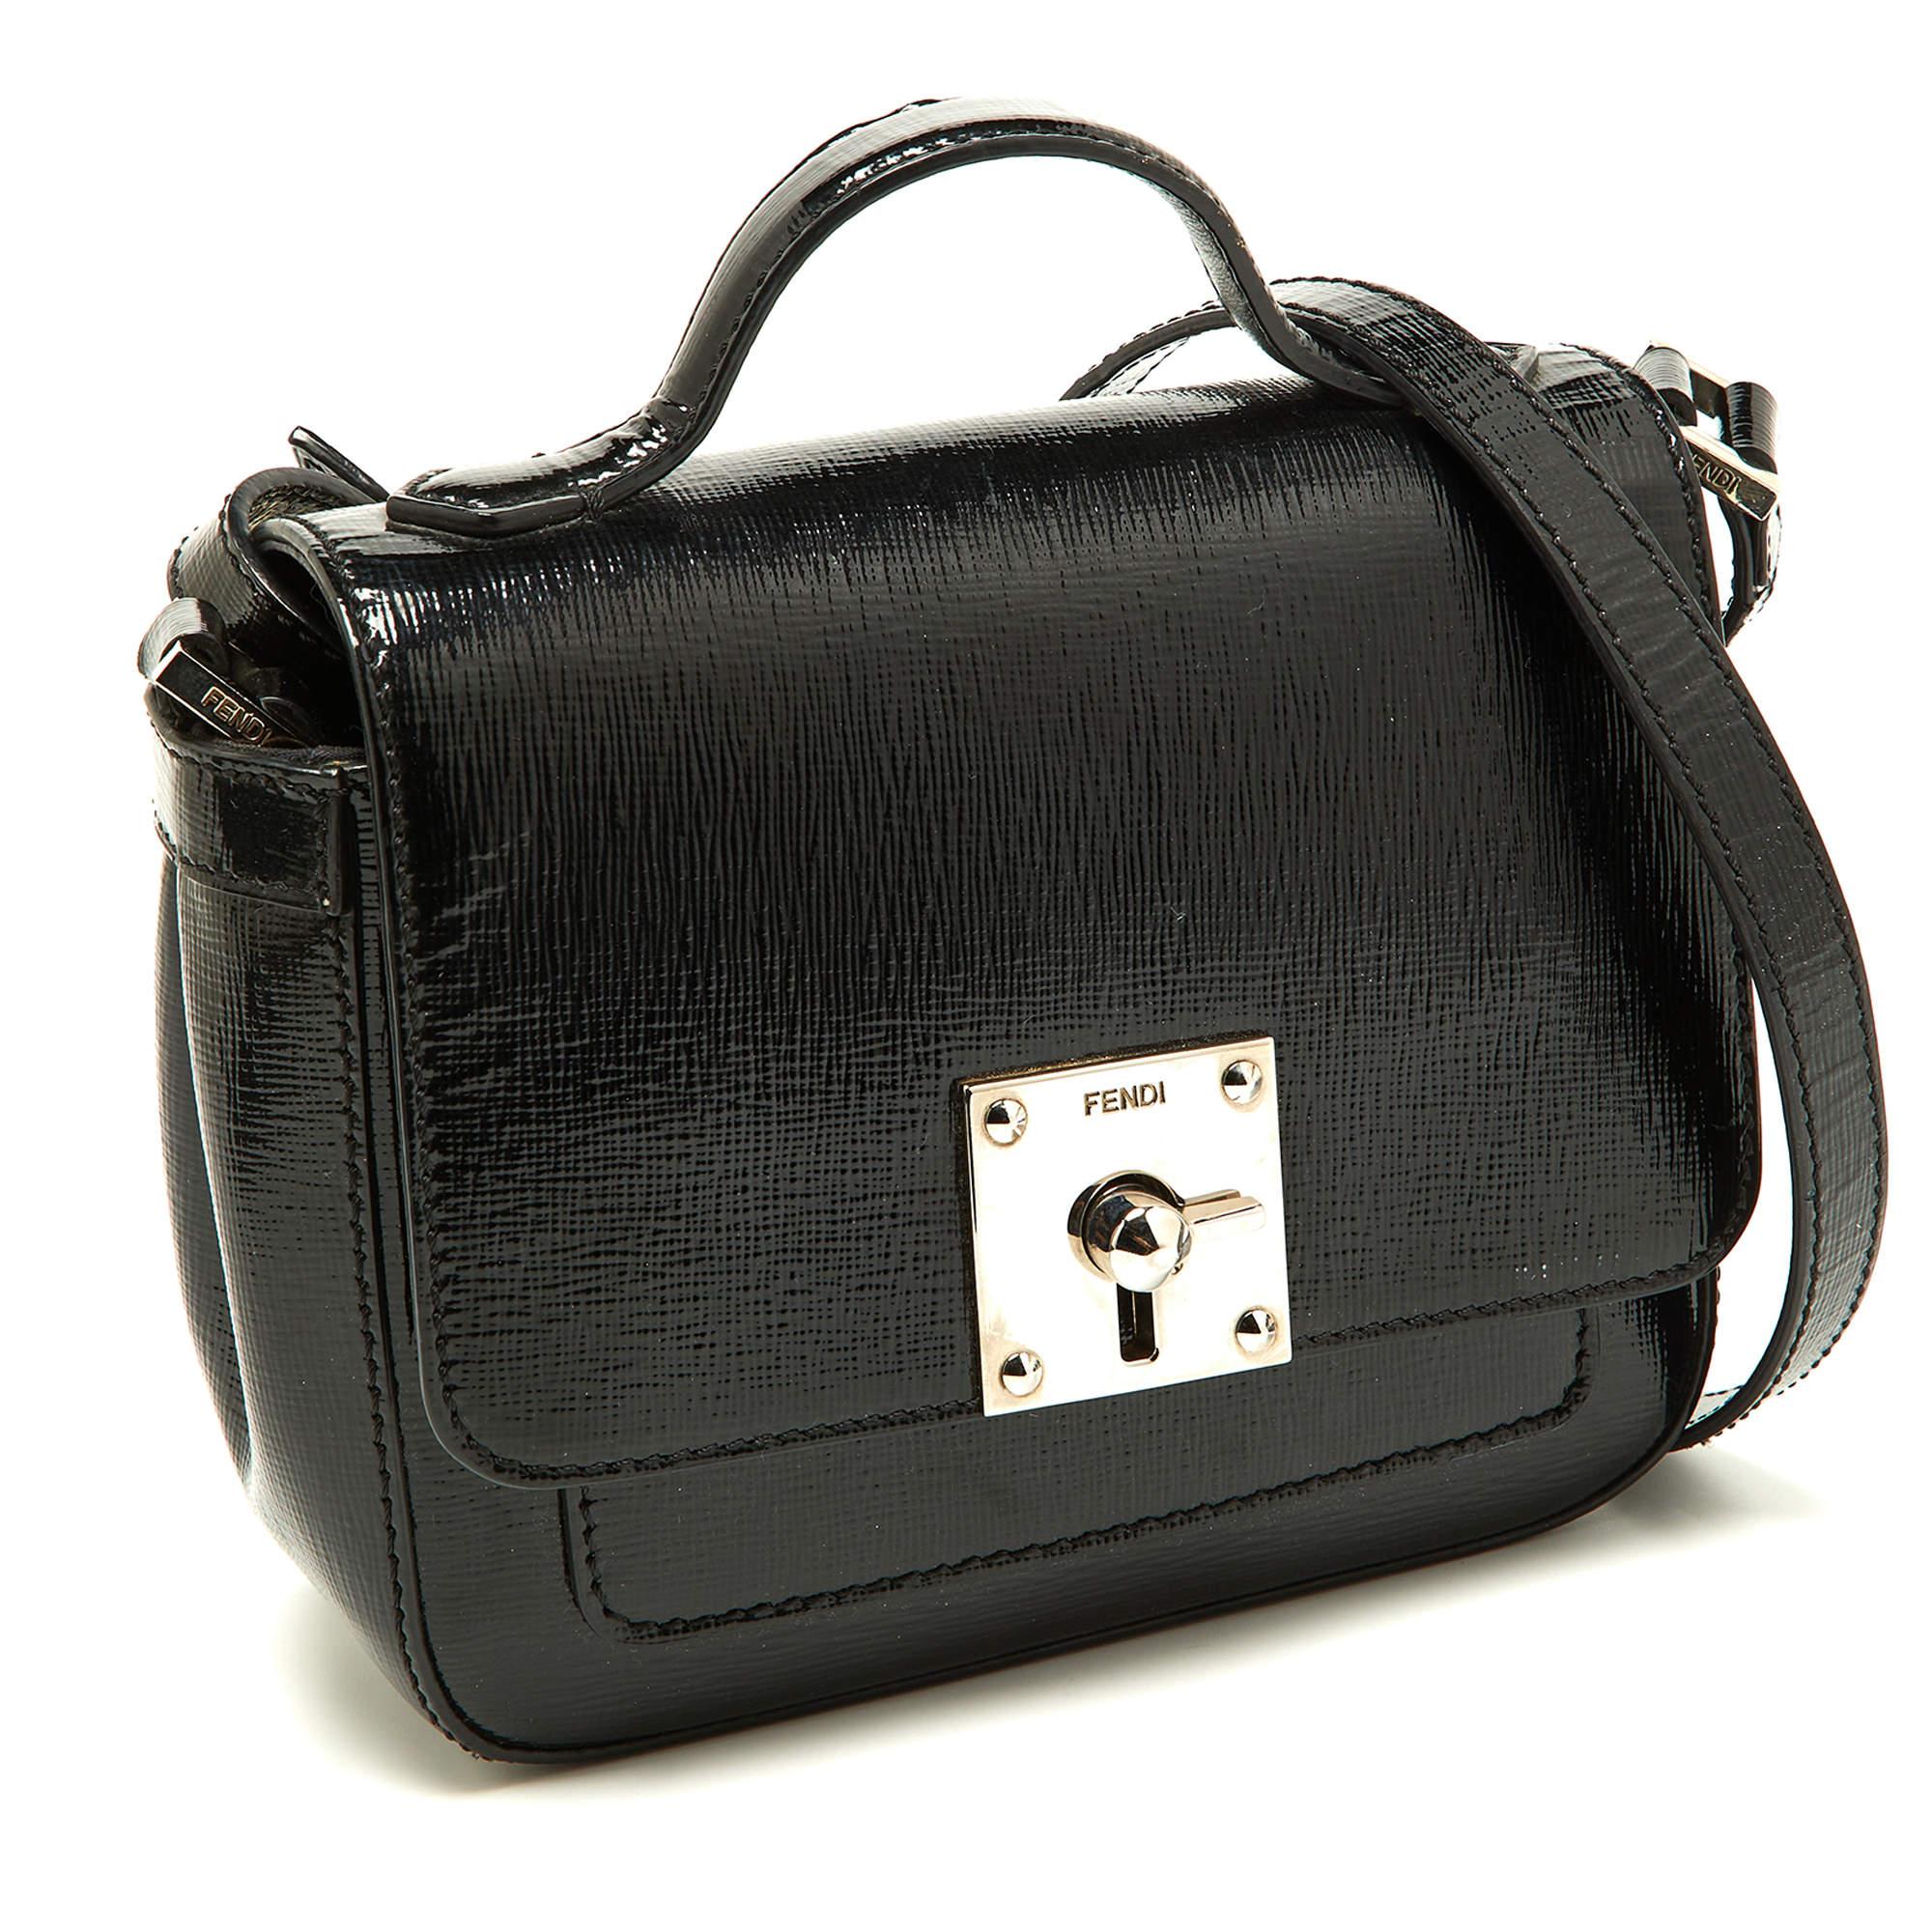 Chic and classy, this Fendi patent leather mini cross-body bag will surely be your new go-to bag. It features a luxurious exterior on it's structured shape and an adjustable shoulder strap. It also has a top handle and a silver-tone turn-lock